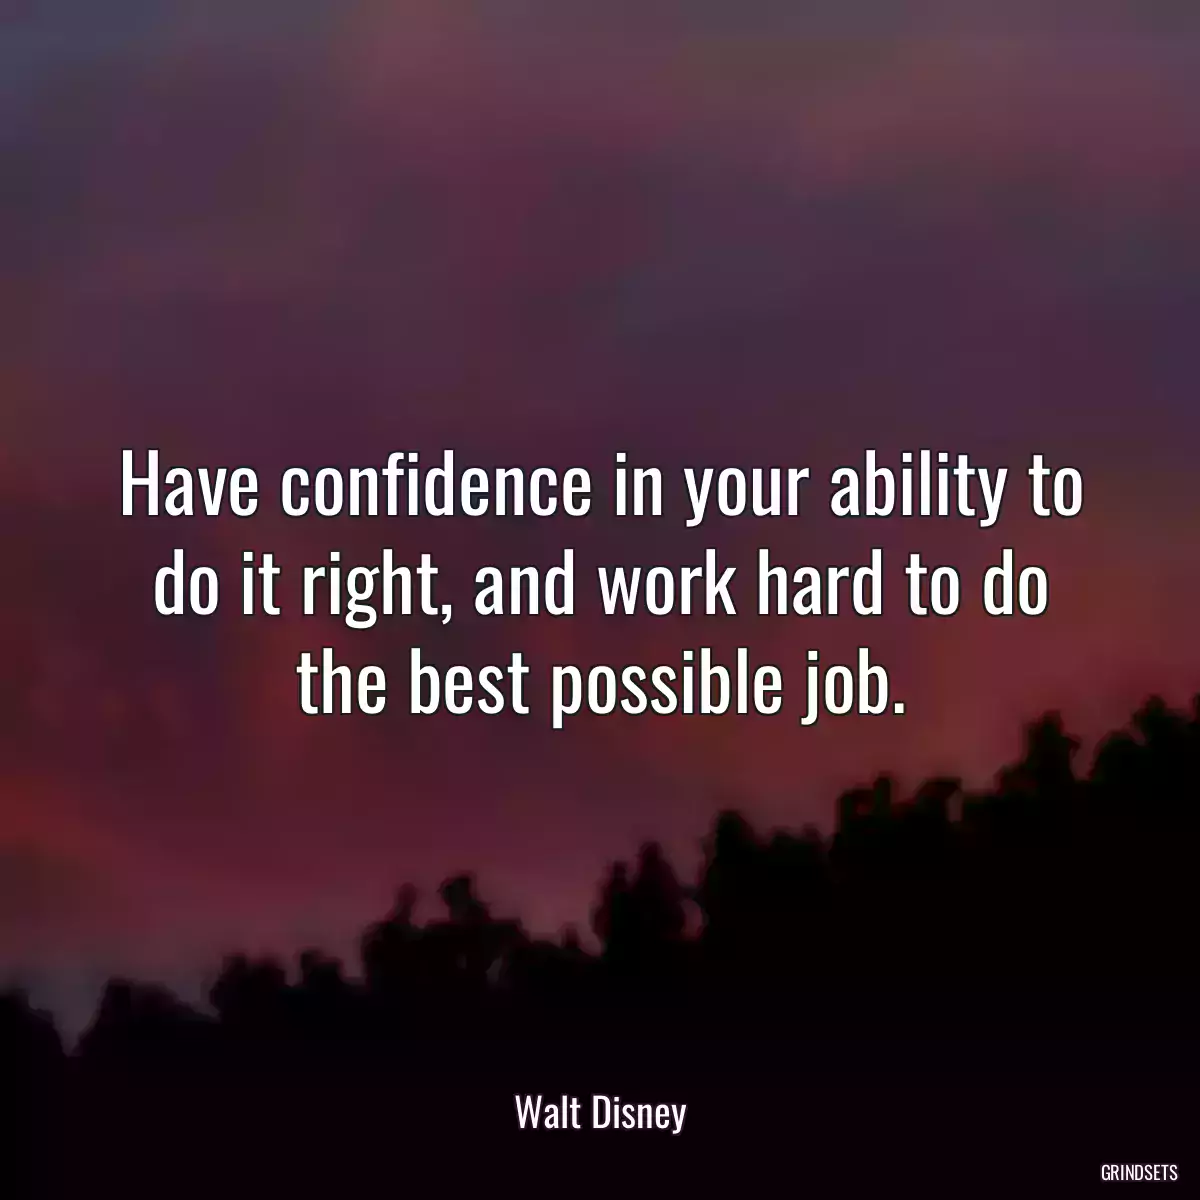 Have confidence in your ability to do it right, and work hard to do the best possible job.